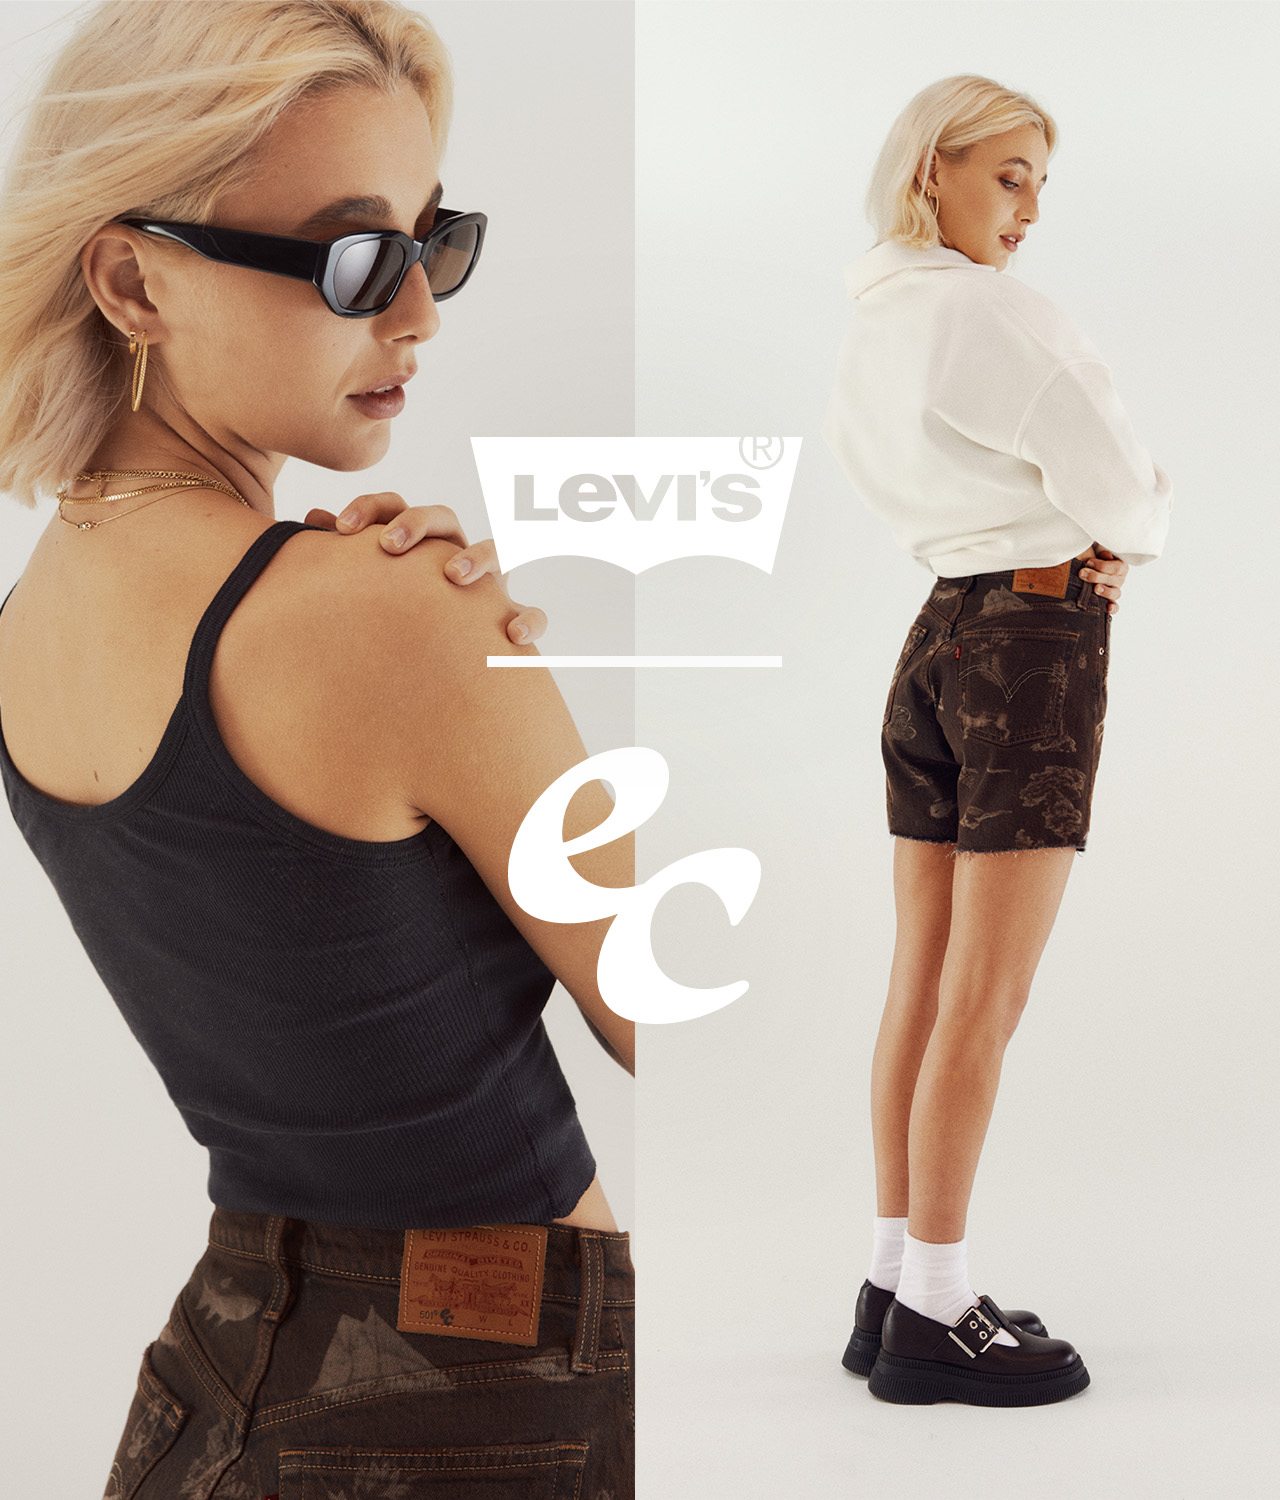 The Levi's® x Emma Chamberlain limited edition 501® Shorts are now available exclusively on Levi.com and the Levi's® App.